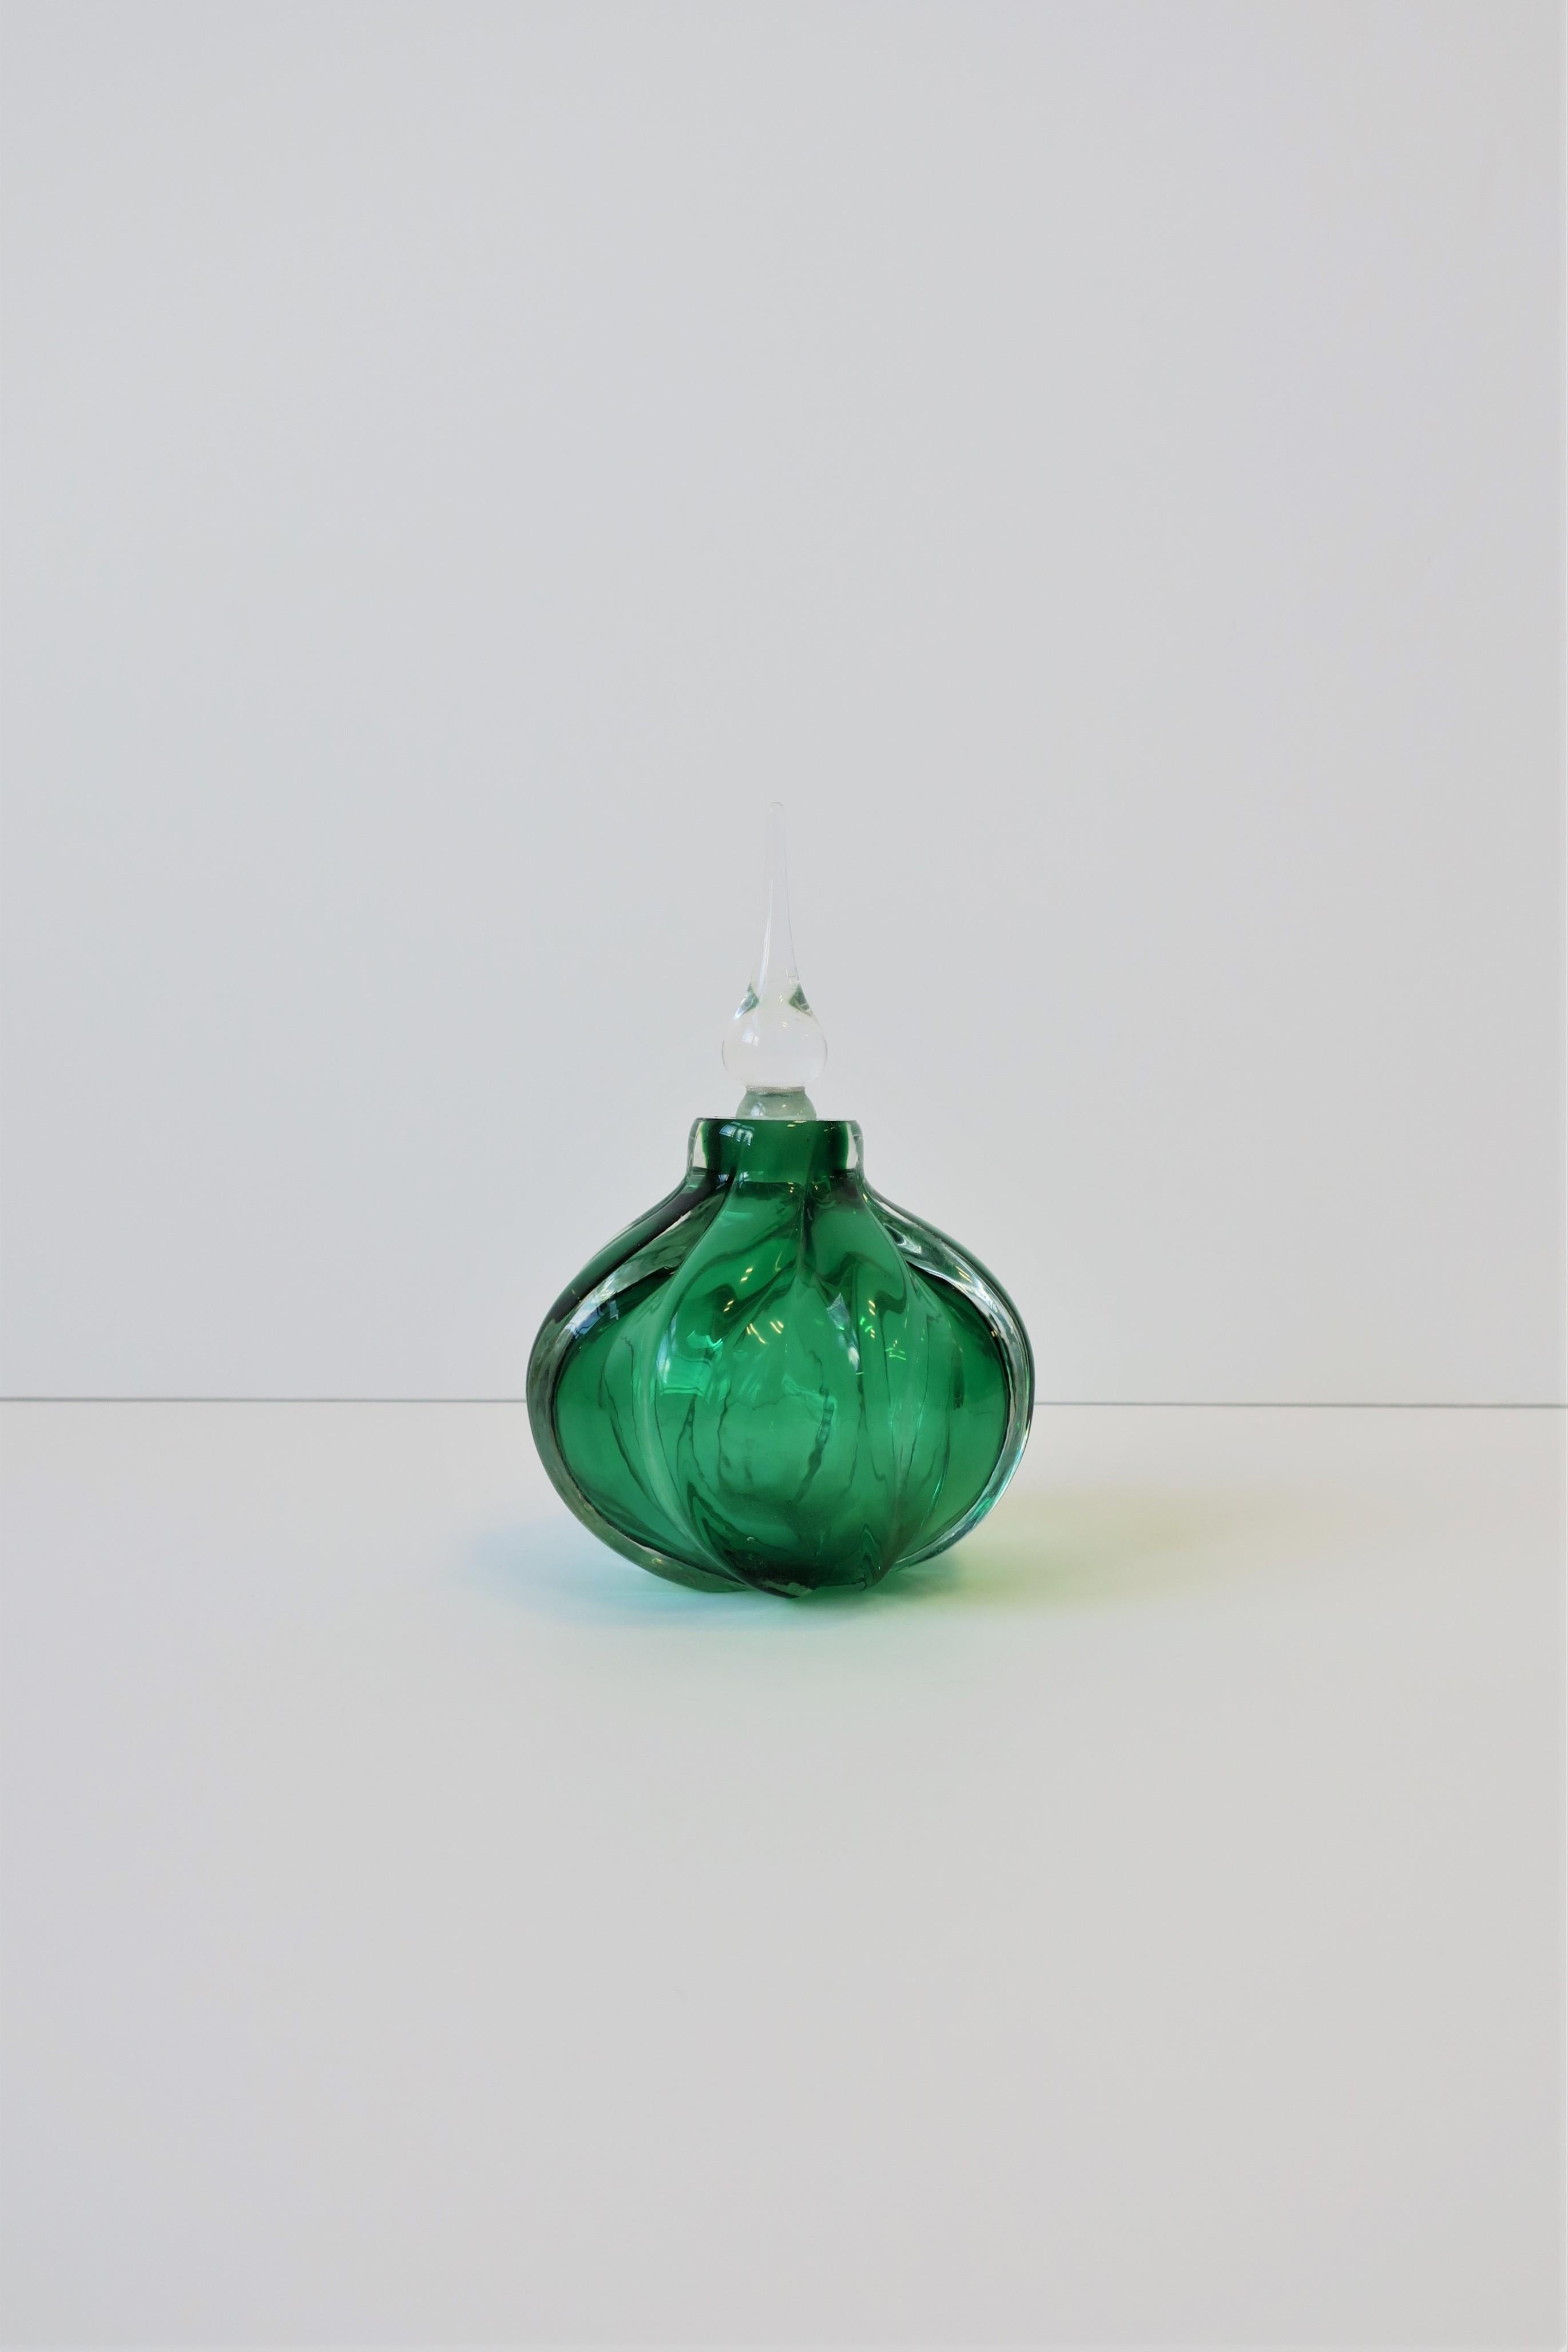 A very beautiful and substantial Emerald green art glass perfume vanity bottle signed and numbered on bottom, circa mid-20th century. Bottle is Emerald green and clear art glass, round with fluted design, and clear art glass bottle stopper. Signed